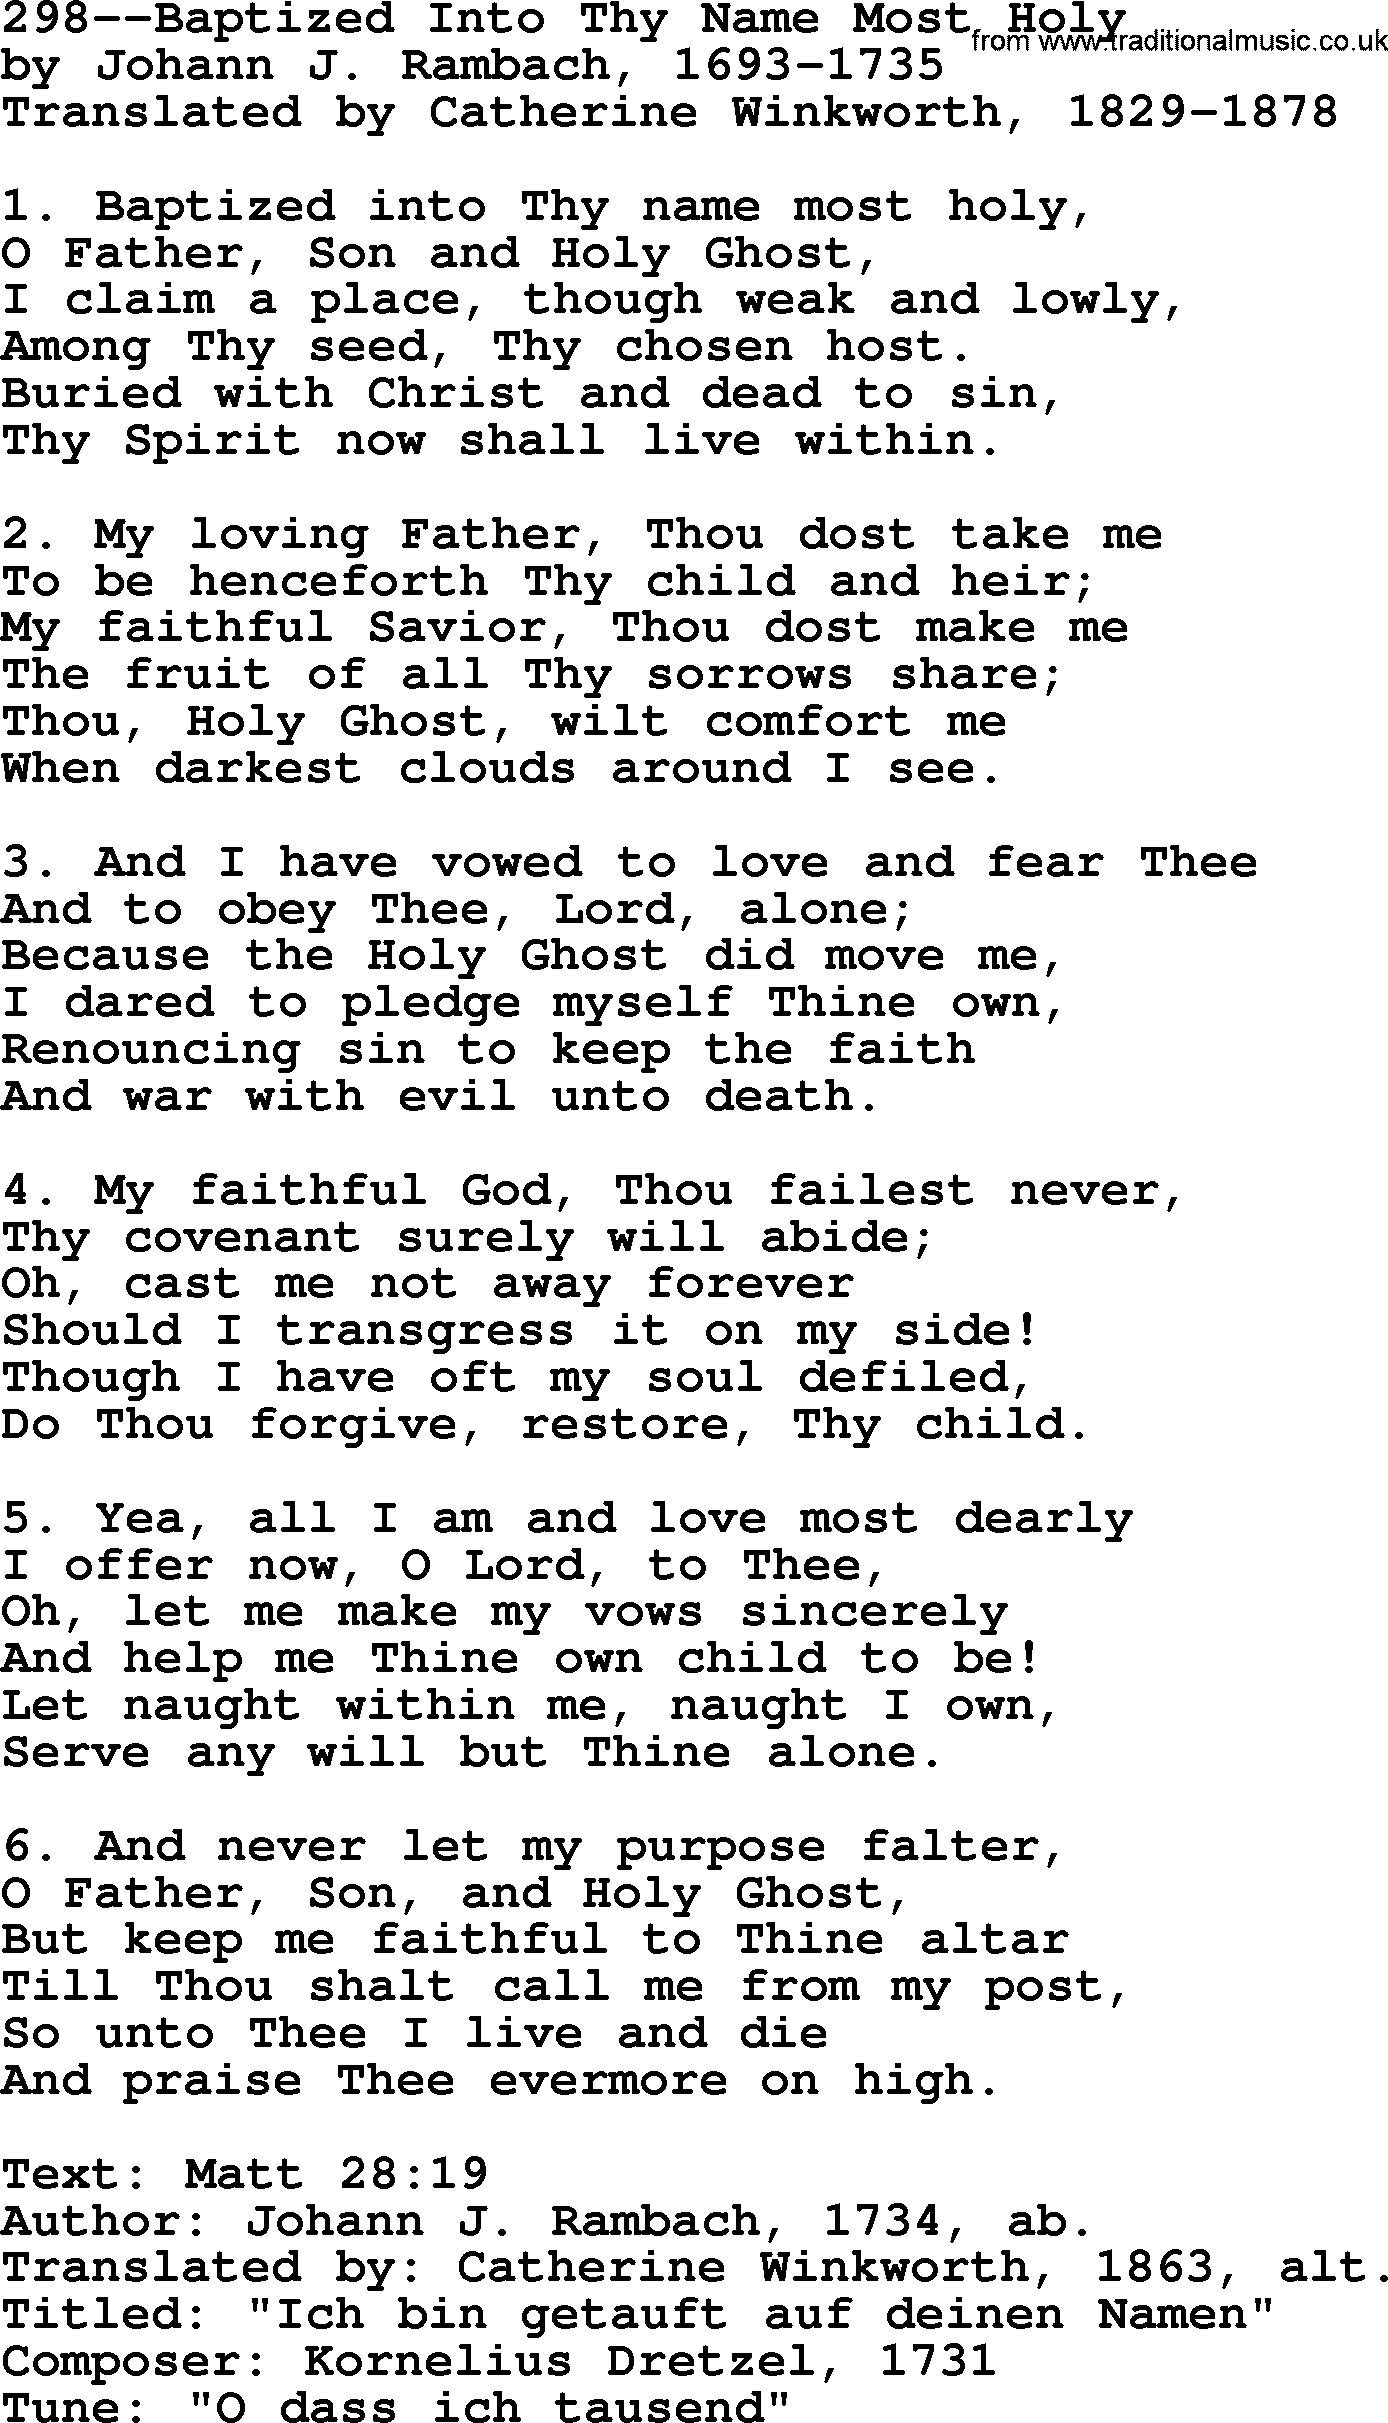 Lutheran Hymns, Song:298--Baptized Into Thy Name Most Holy - lyrics and PDF